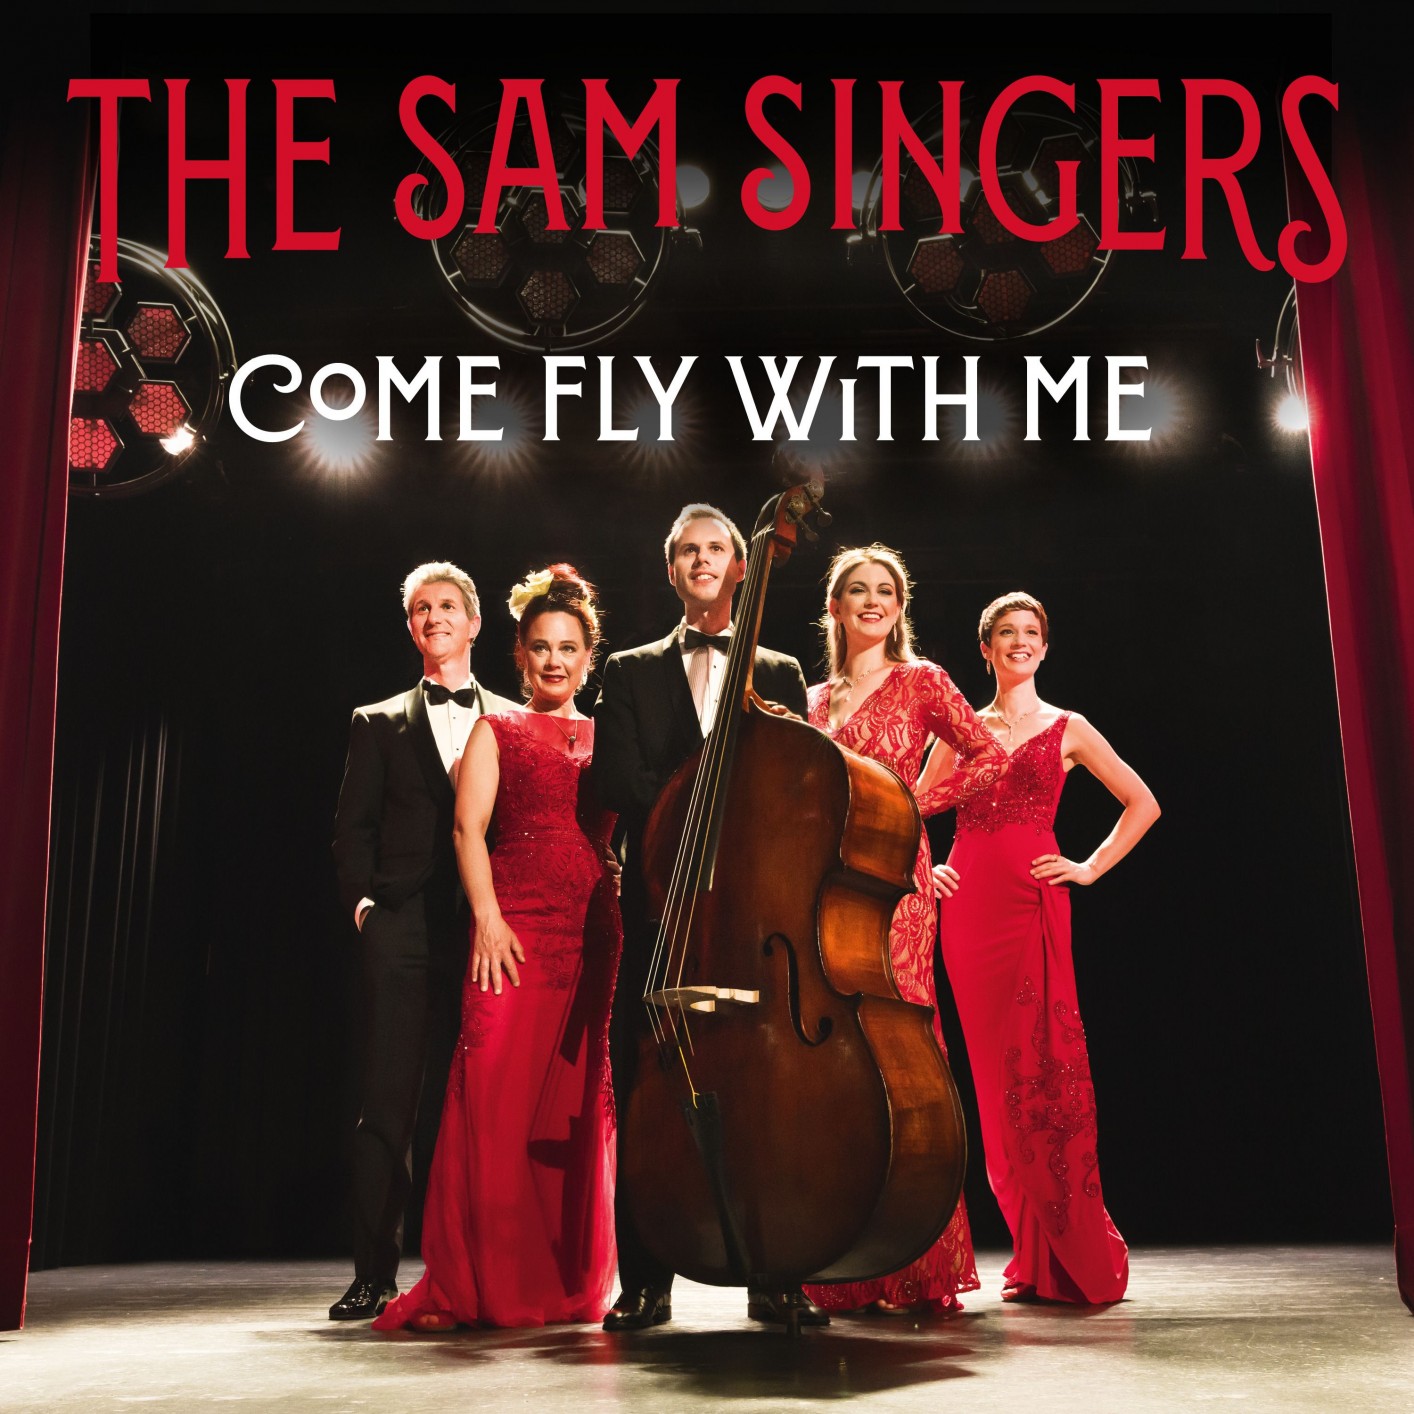 The Sam Singers – Come Fly with Me (2021) [FLAC 24bit/96kHz]